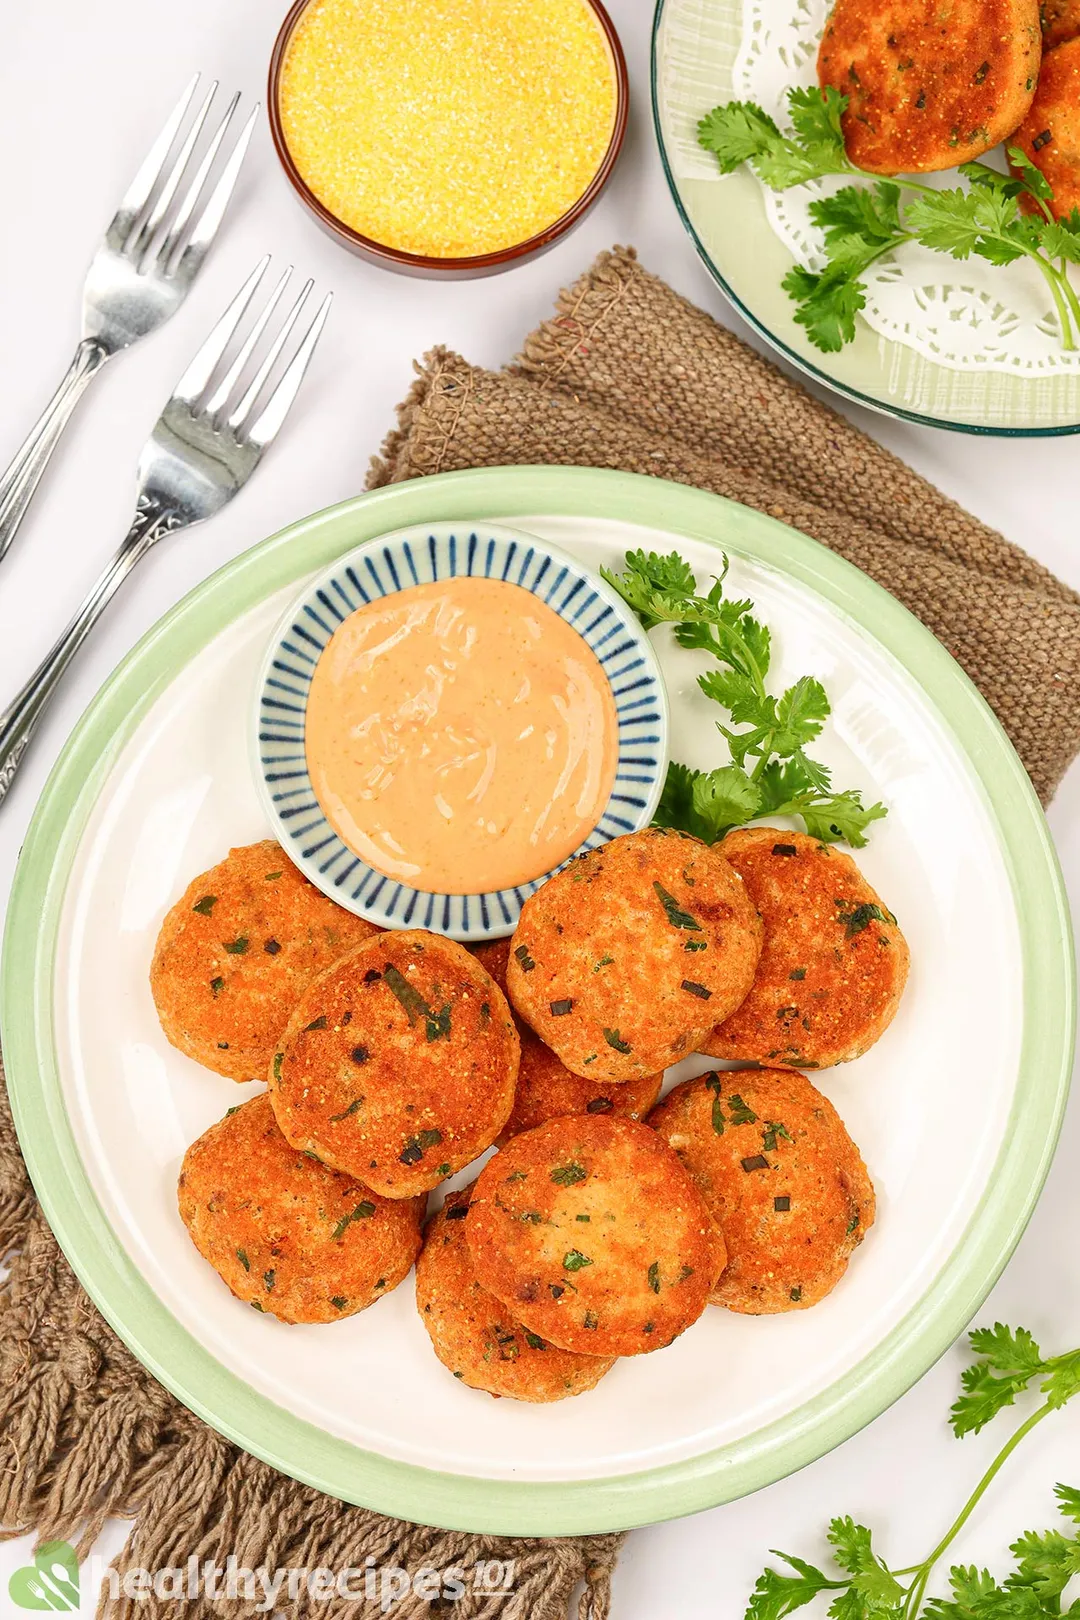 a plate of salmon patties with a small bowl of yellow sauce garnish with fork, a bowl of cornmeal and coriander